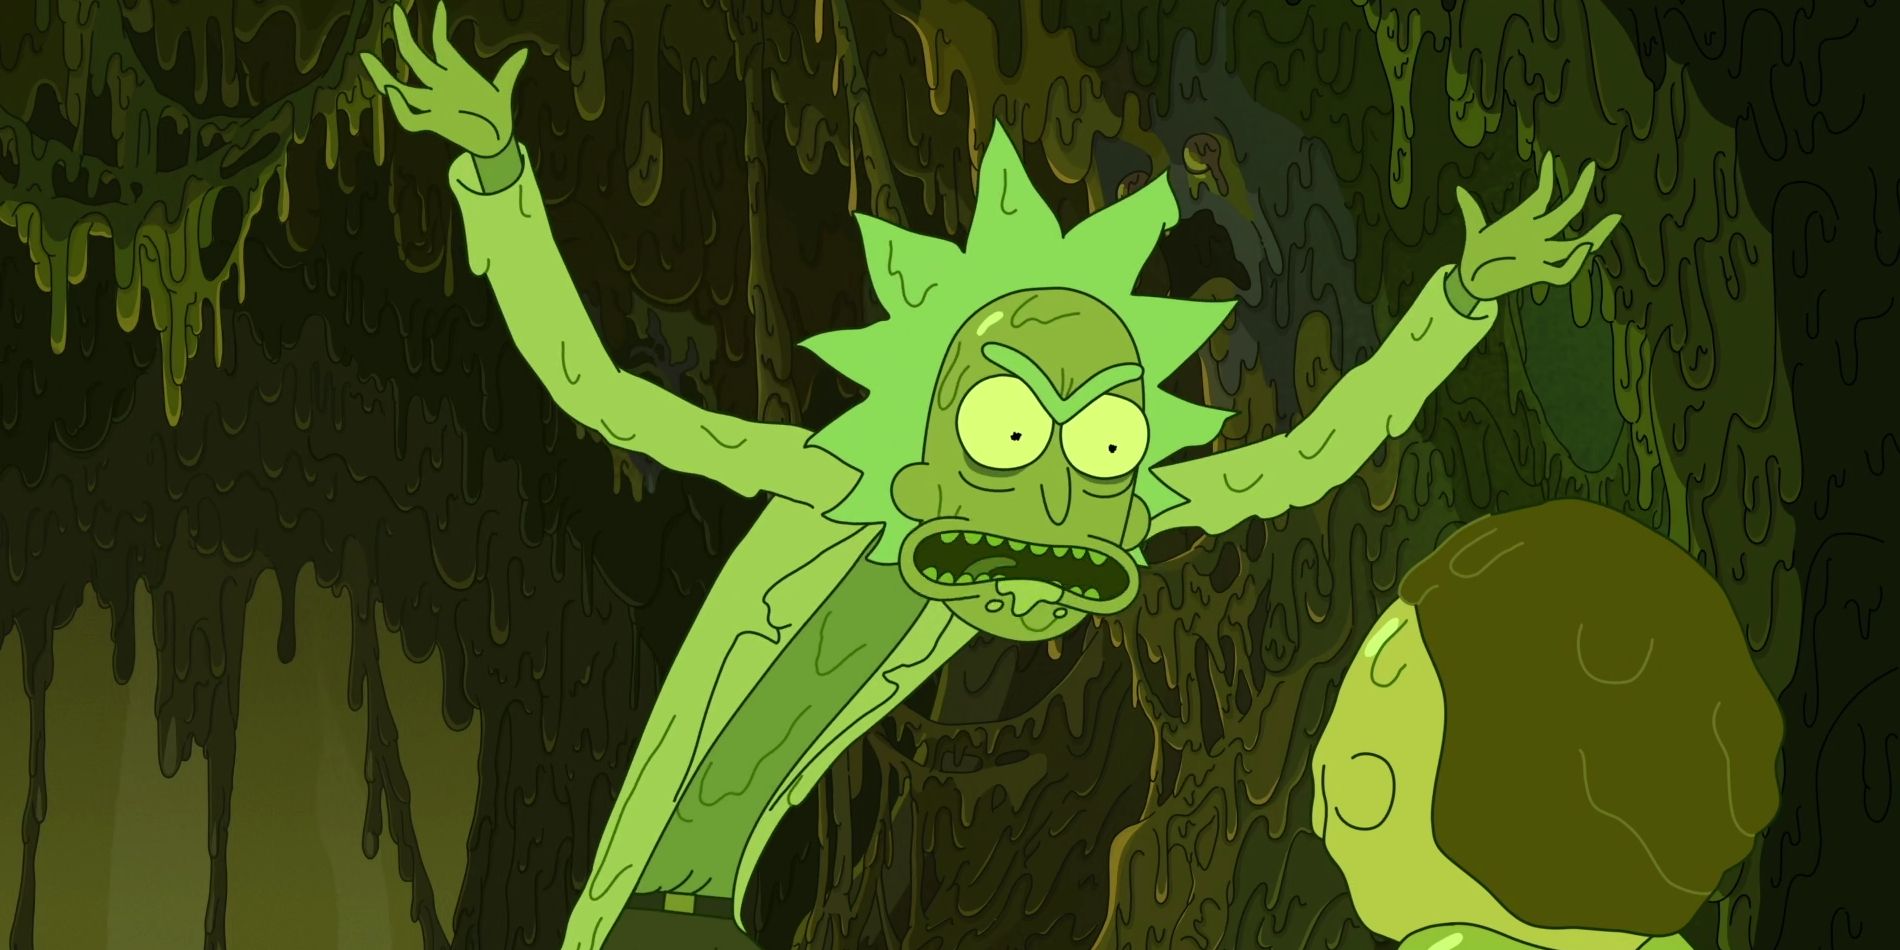 Toxic Rick scolds Morty in Rick & Morty.